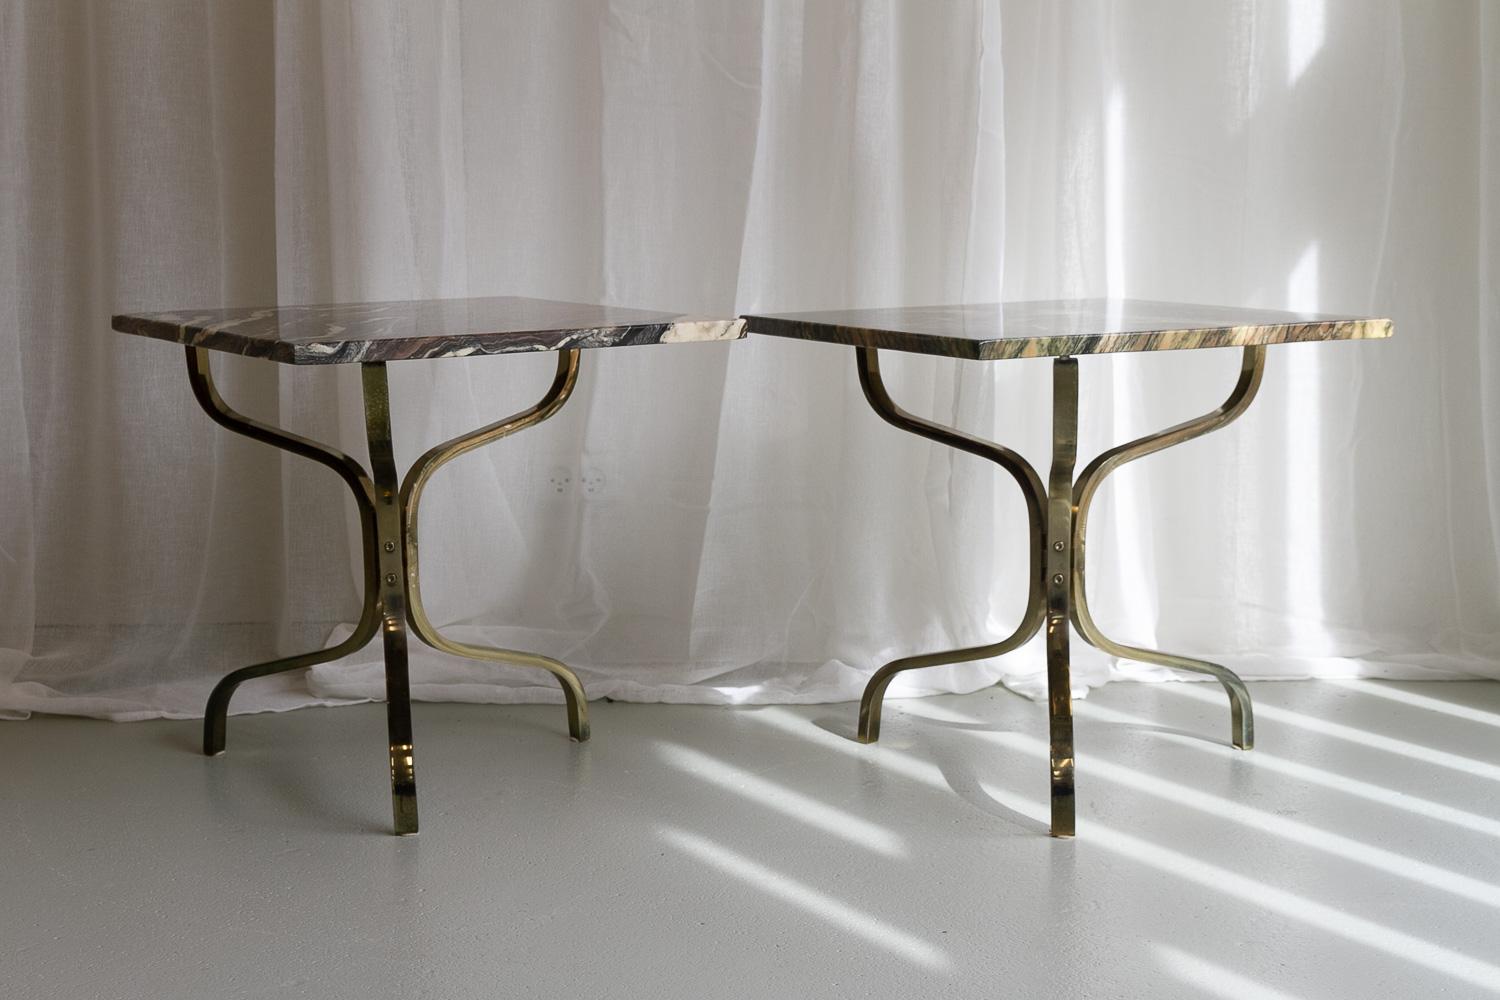 Italian Marble and Gold Side Tables, 1980s. Set of 2.  
Pair of three-legged sidetables with thick and heavy marble tops. Frame in brass coated steel. 
Suitable as coffee tables, end tables, lamp or flower tables.
Good vintage condition with patina